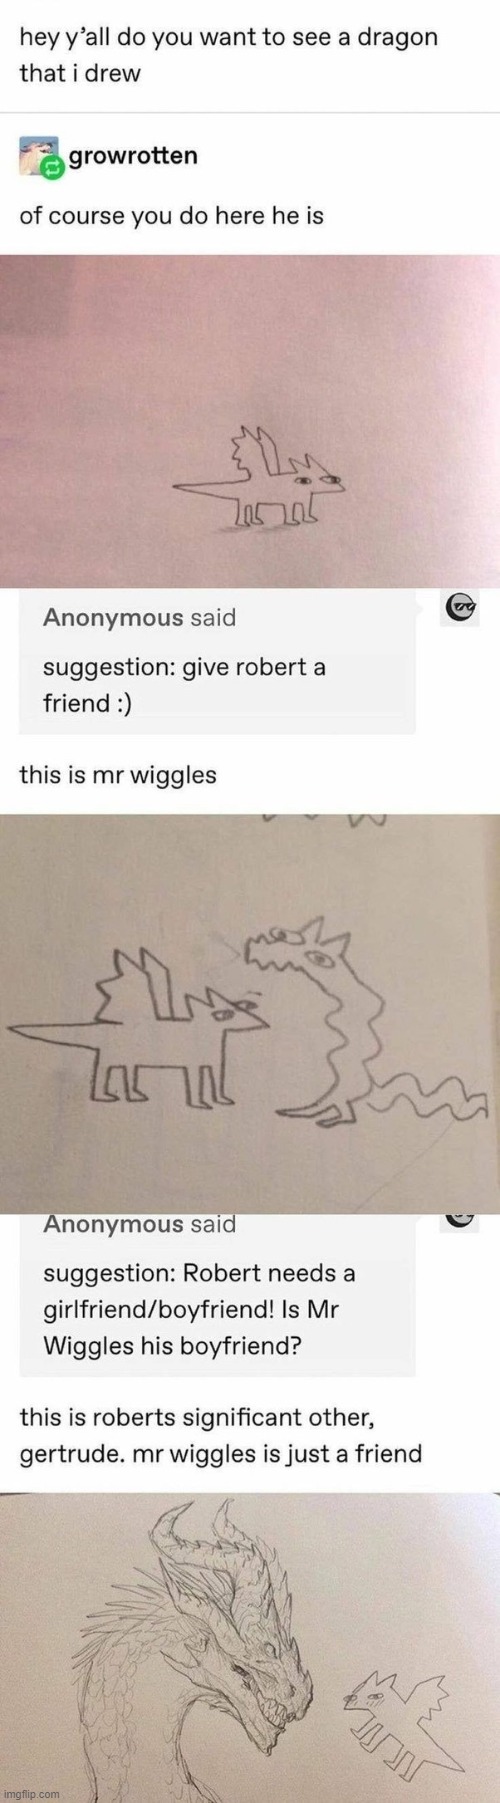 robert the dragon | image tagged in tumblr,dragons | made w/ Imgflip meme maker